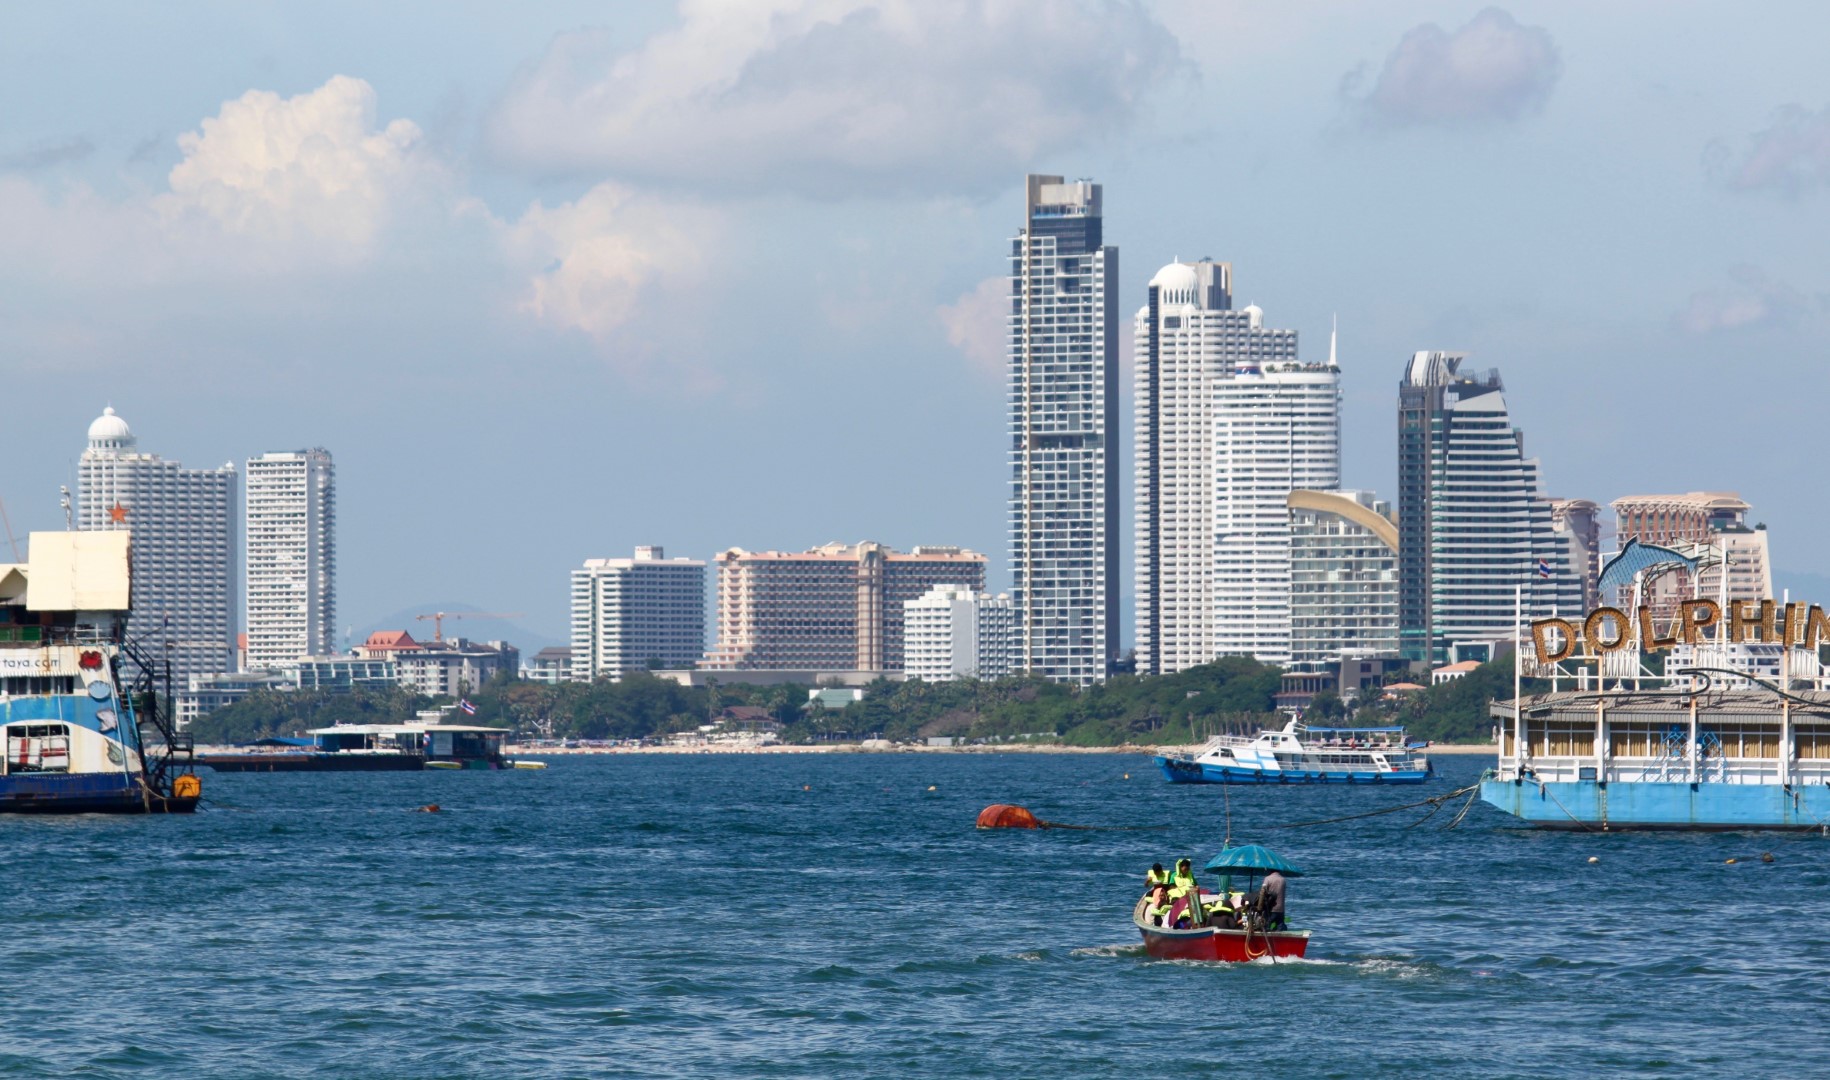 Part 1: Do you live in Pattaya?